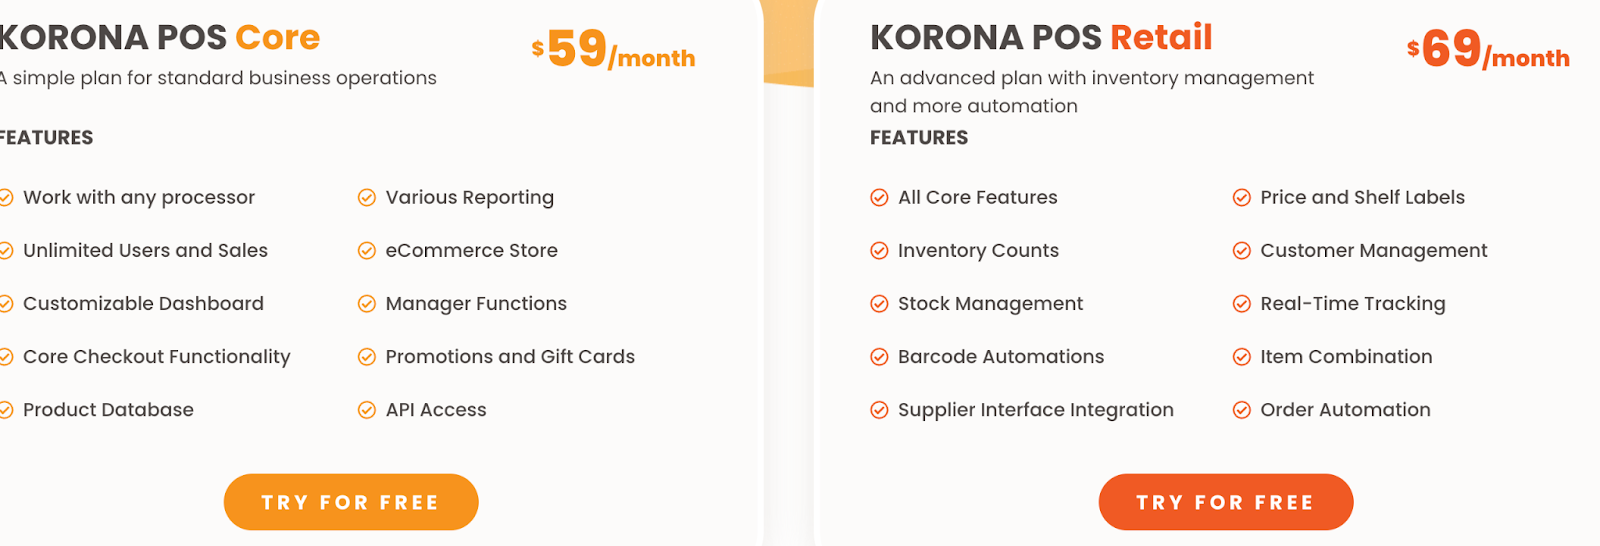 Image illustrating the KORONA's pricing structure, known as one of the best overall POS solution for convenience stores. 